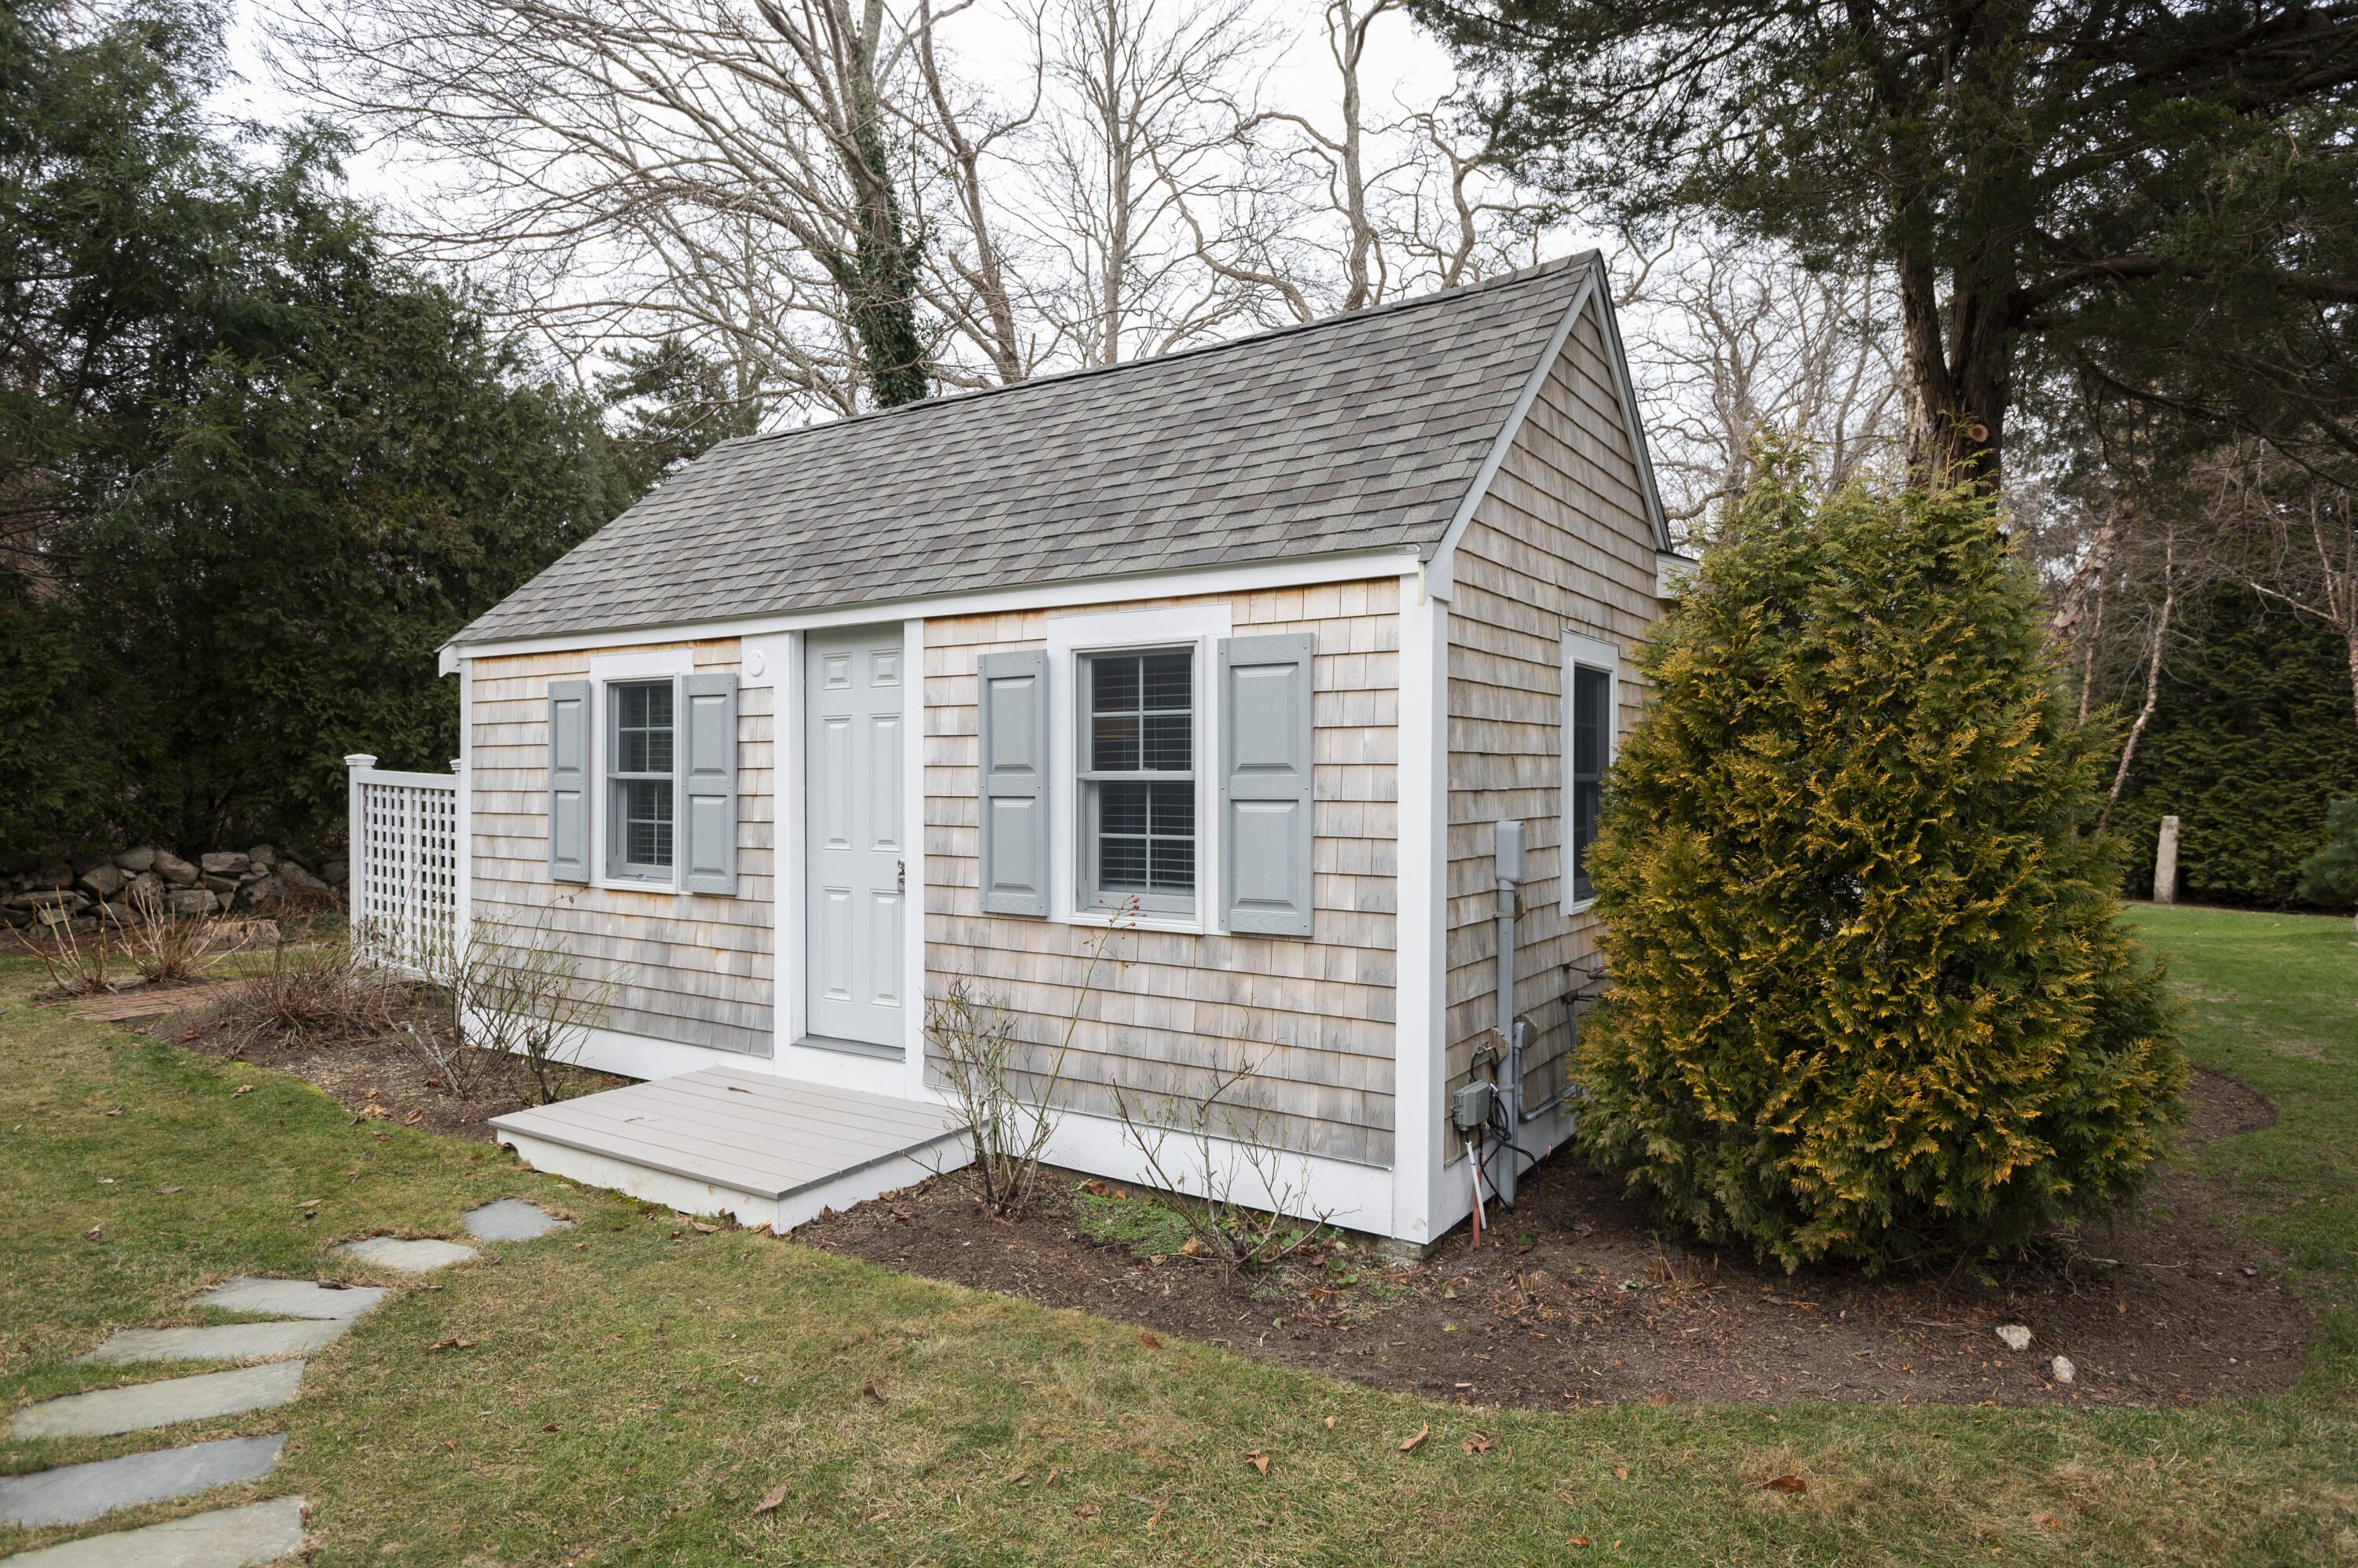 224 N Falmouth Highway # 2U, North Falmouth, Massachusetts 02556, 1 Bedroom Bedrooms, 3 Rooms Rooms,1 BathroomBathrooms,Residential,For Sale,Blue Shutters,224 N Falmouth Highway # 2U,22400050